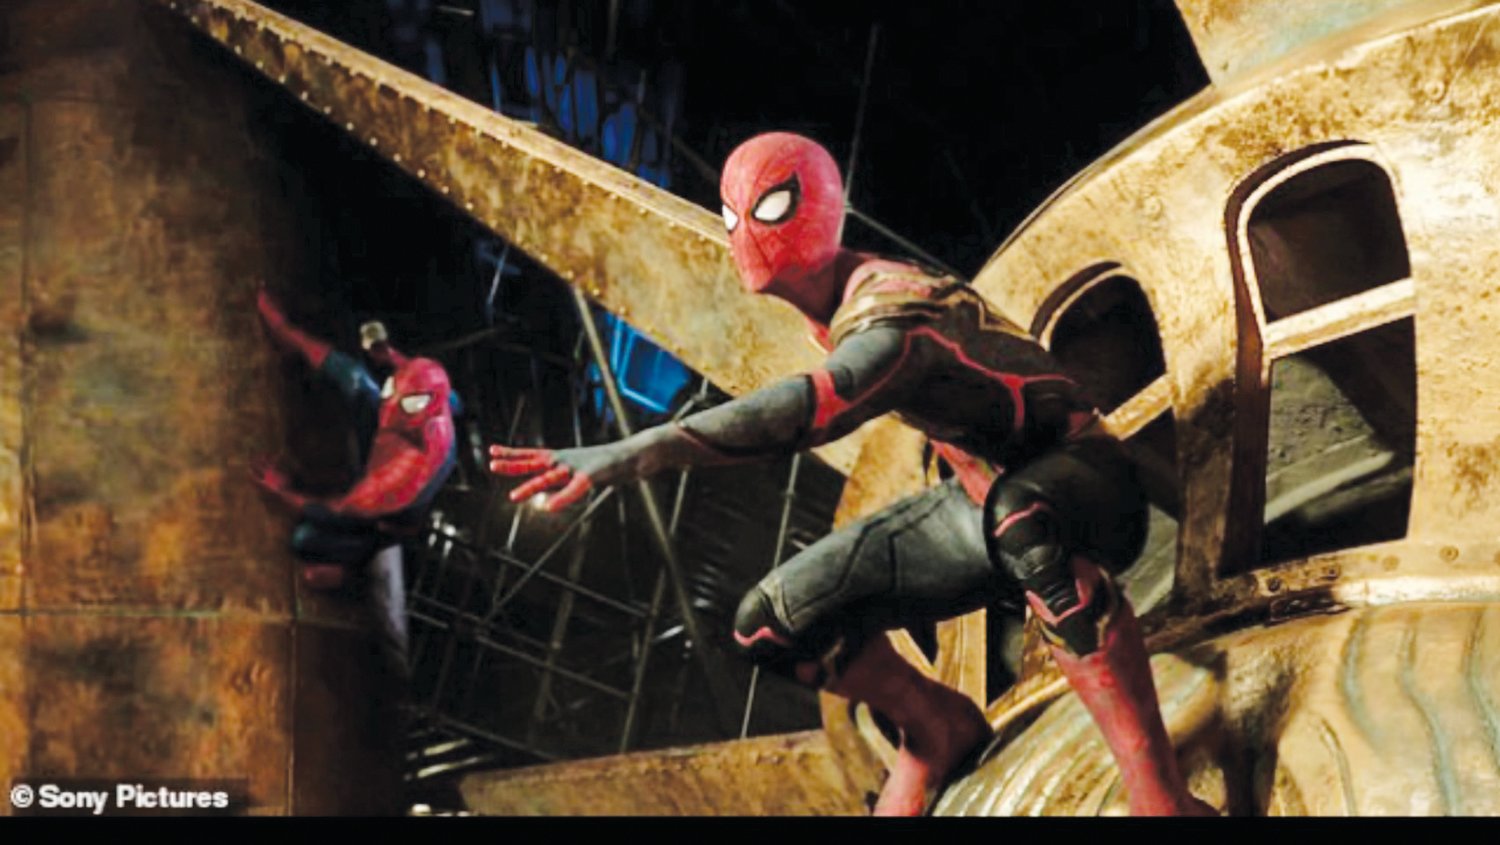 Can you guess what part of this image cost Sony Pictures millions of dollars in box office receipts from China for ‘Spider-Man: No Way Home,’ whose global box office is approaching $2 billion?